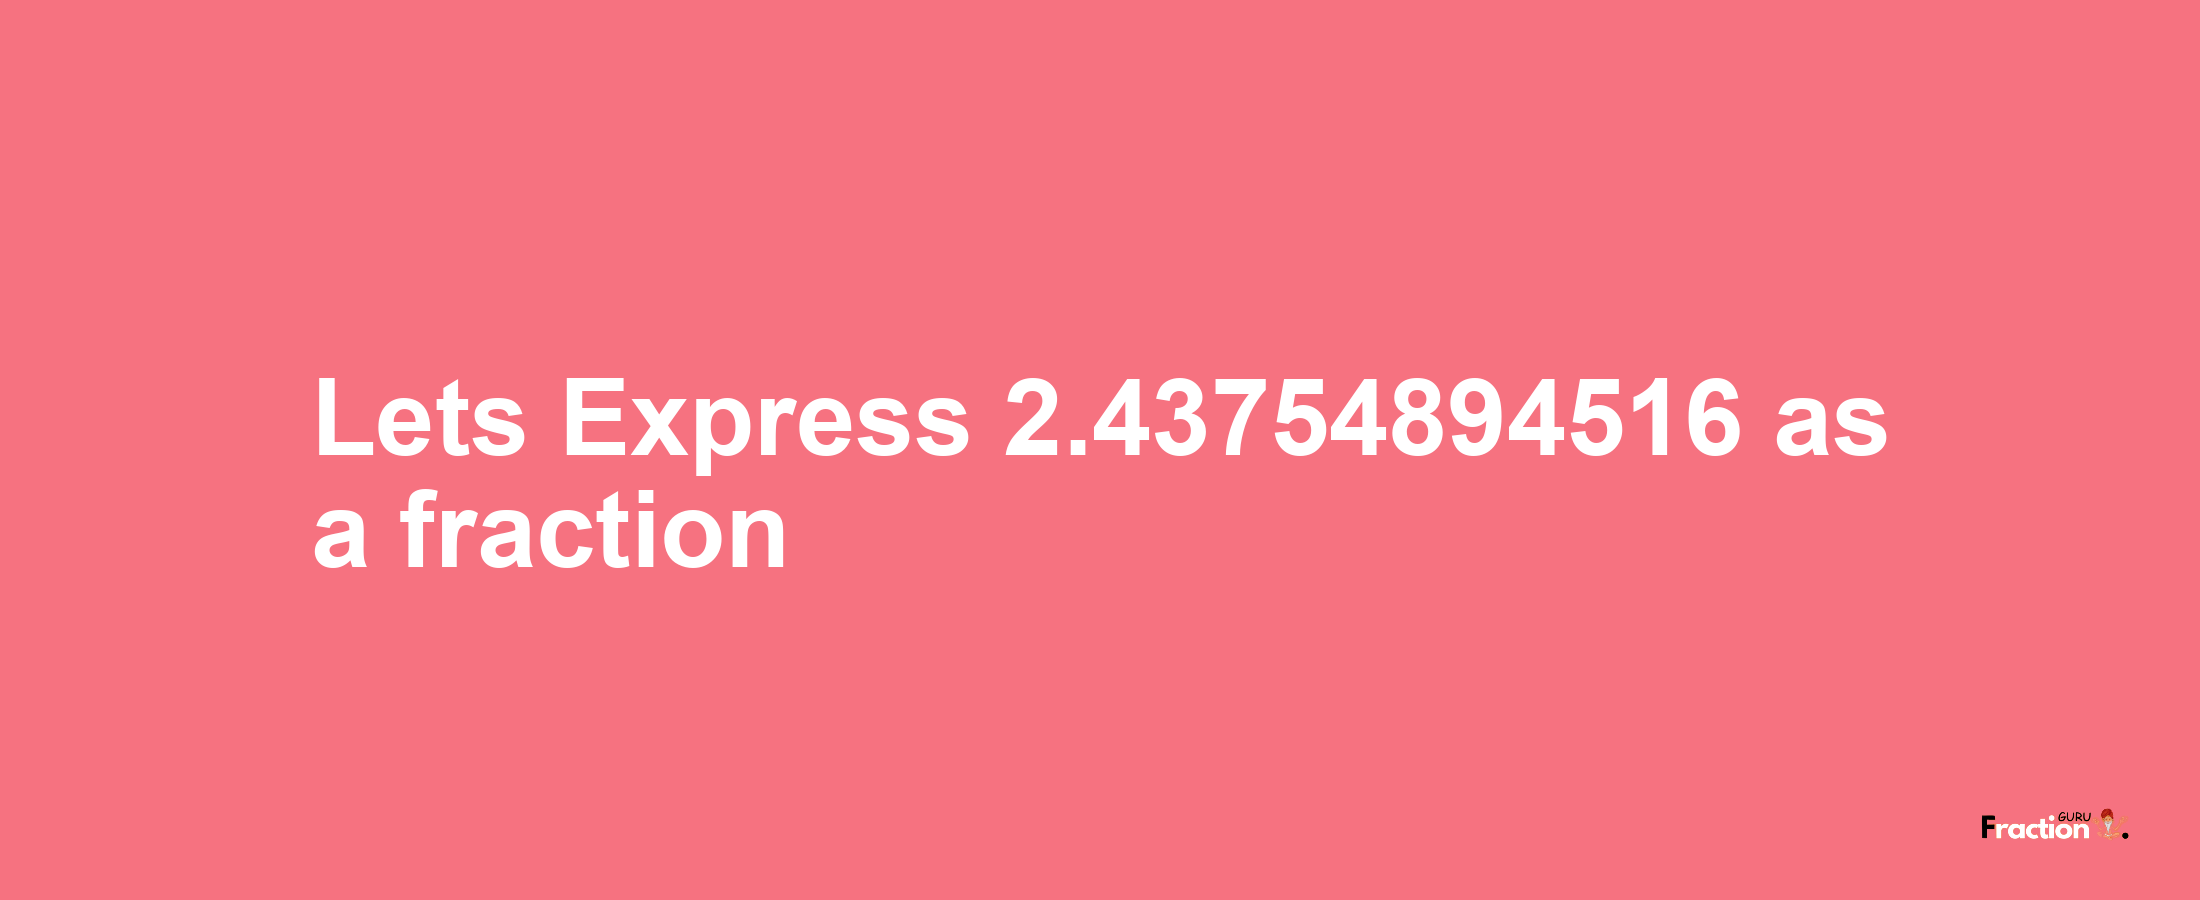 Lets Express 2.43754894516 as afraction